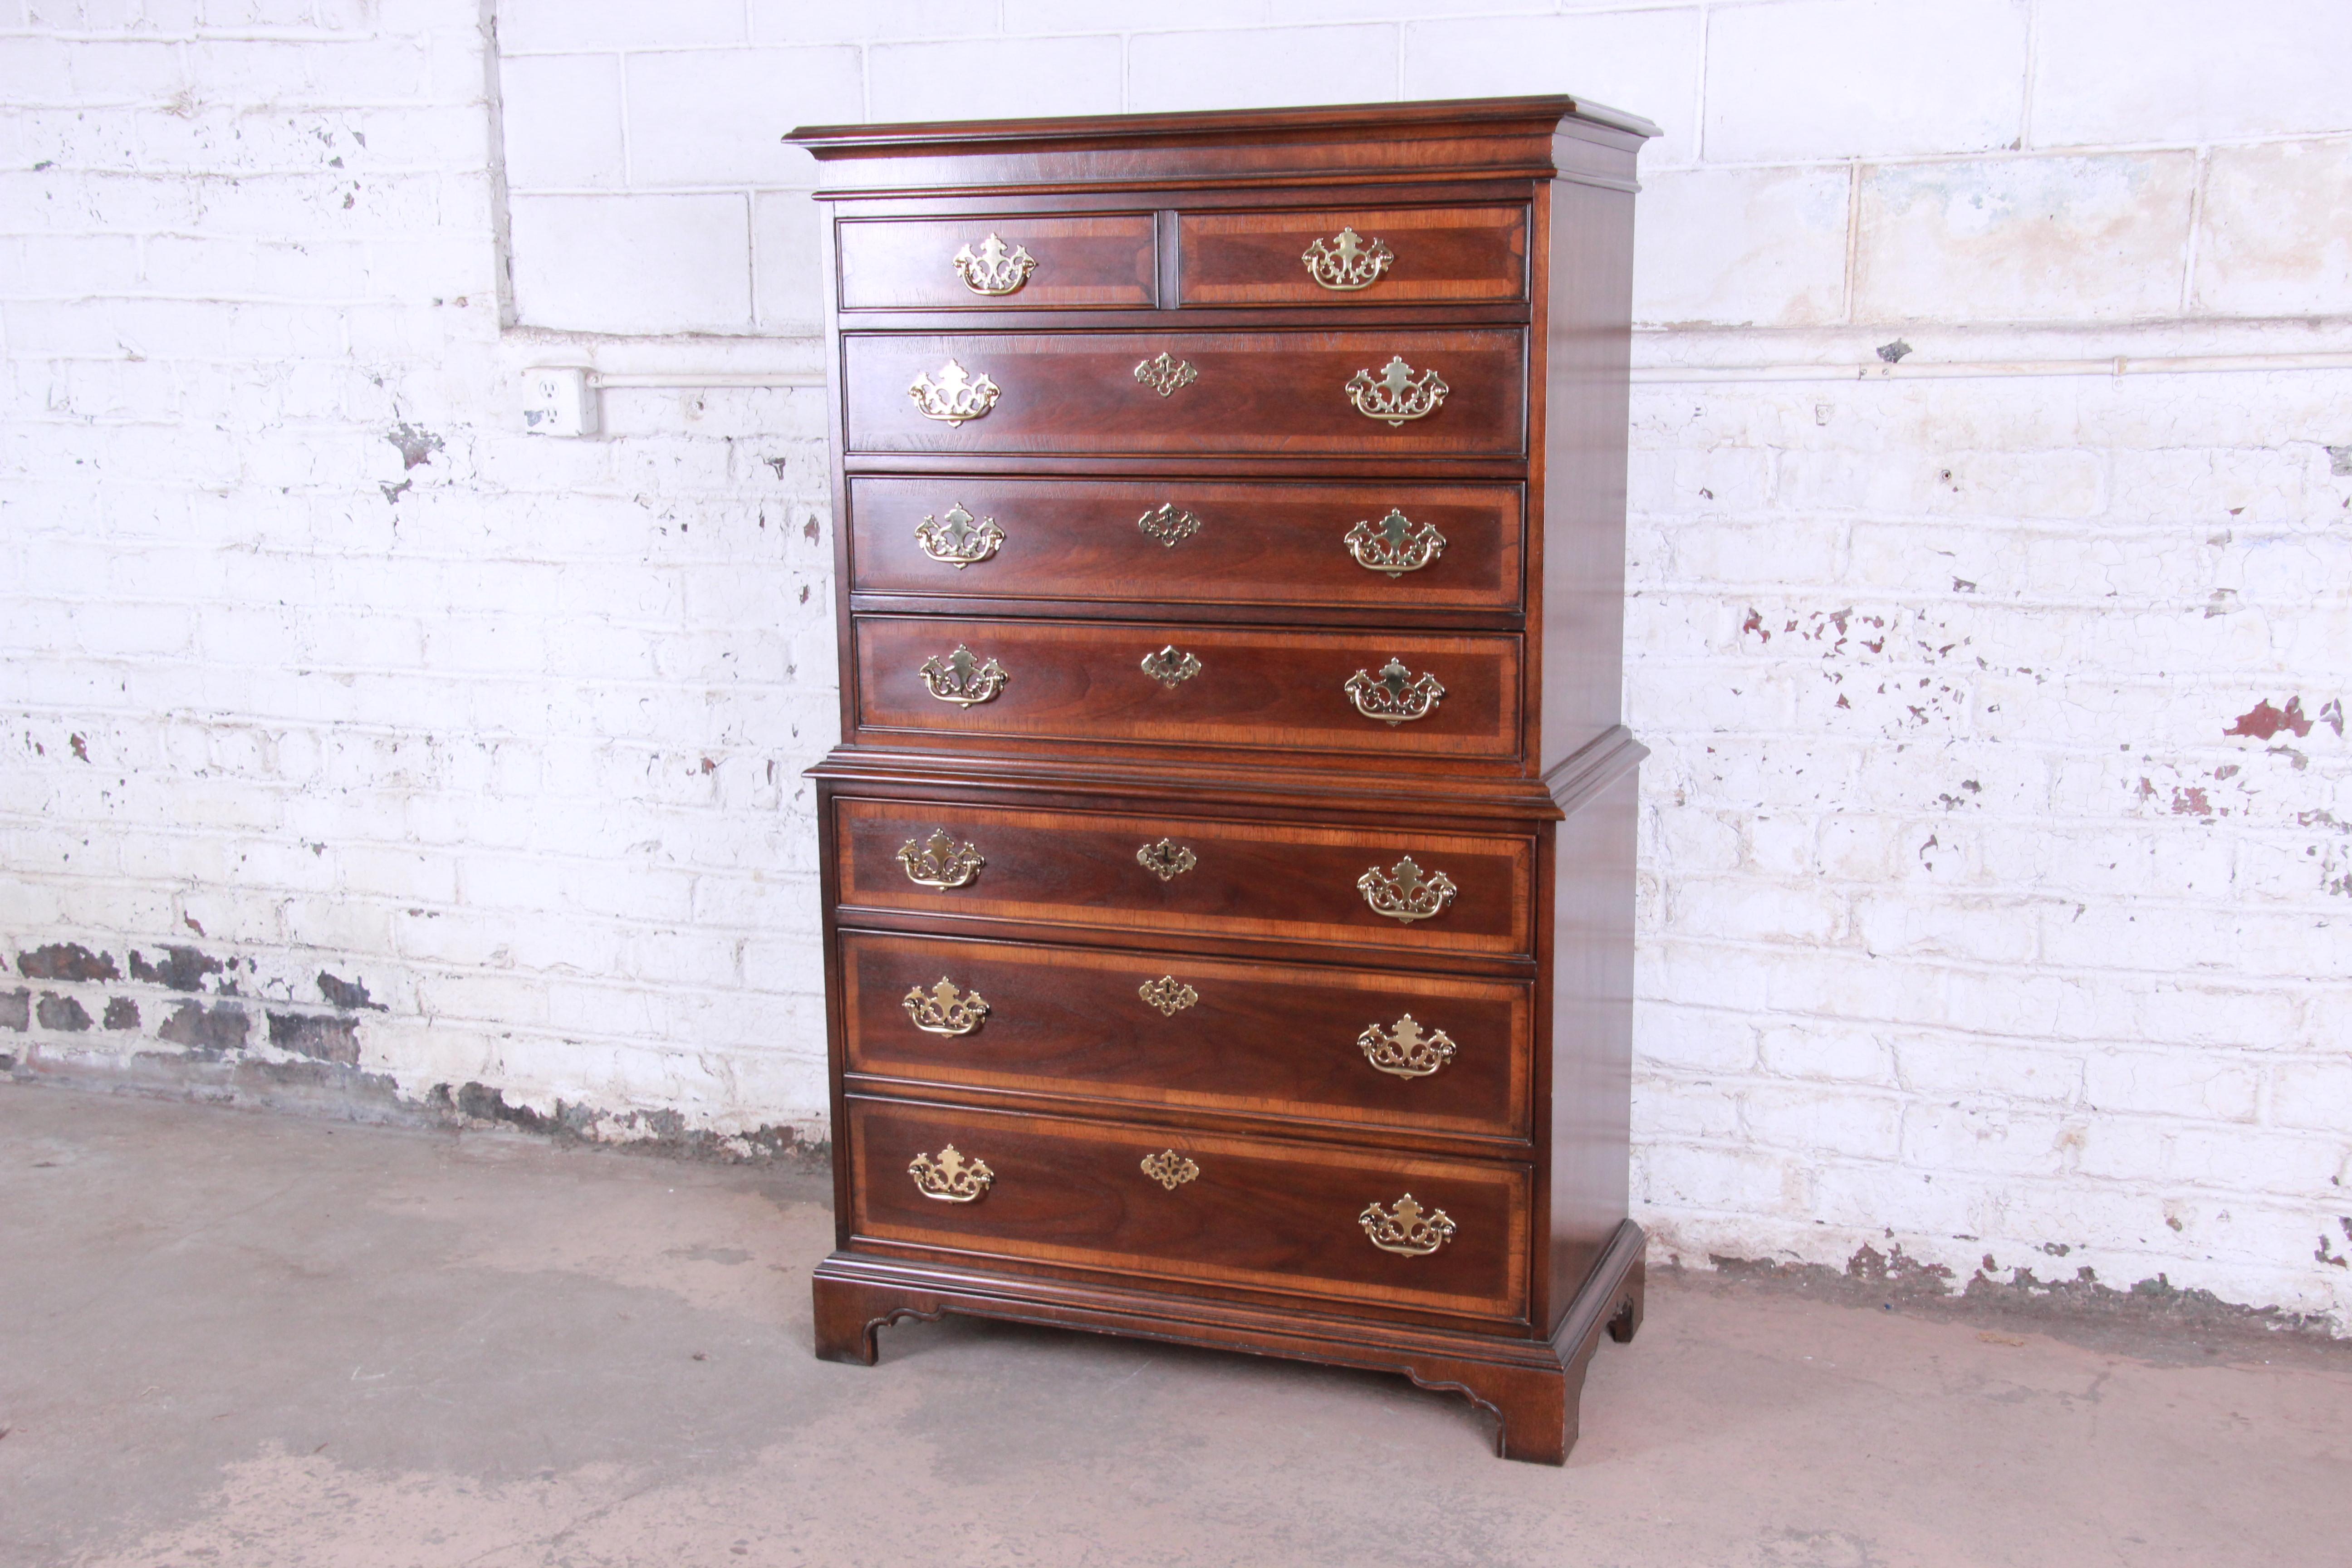 A beautiful Chippendale style banded mahogany highboy dresser by Drexel Heritage. The dresser features a traditional English style, gorgeous mahogany wood grain with a nice banded edge, and original brass hardware. It offers ample room for storage,